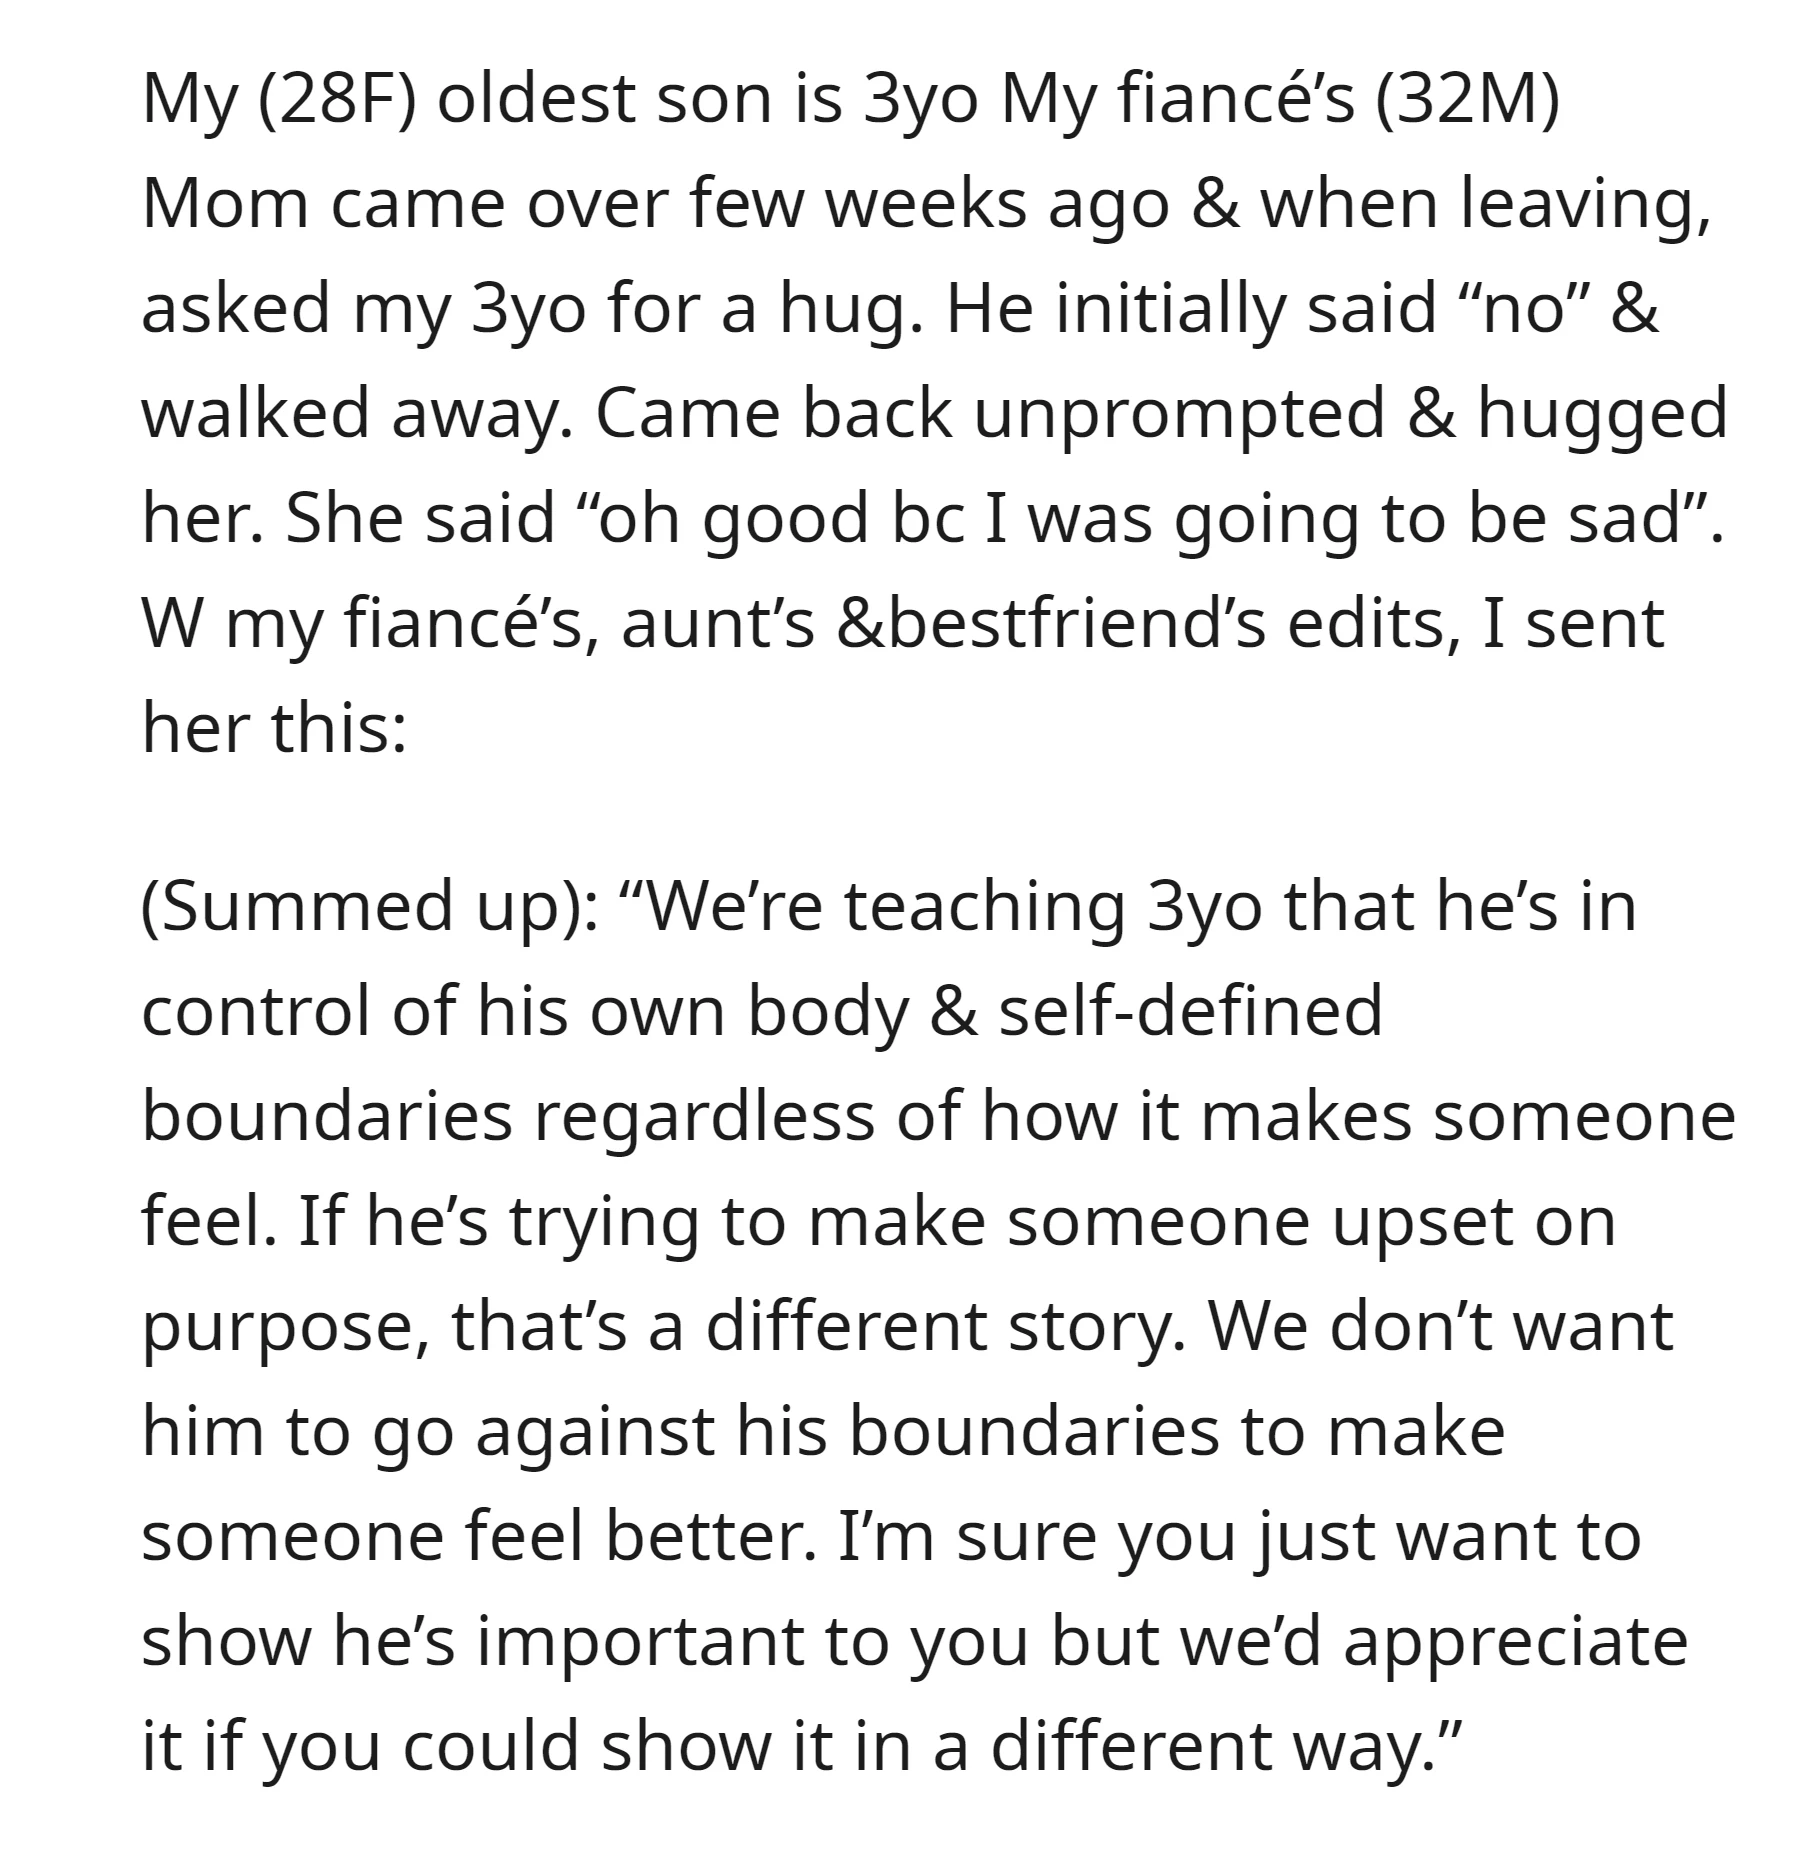 OP explained to her fiancé's mom that they're teaching their son about personal boundaries